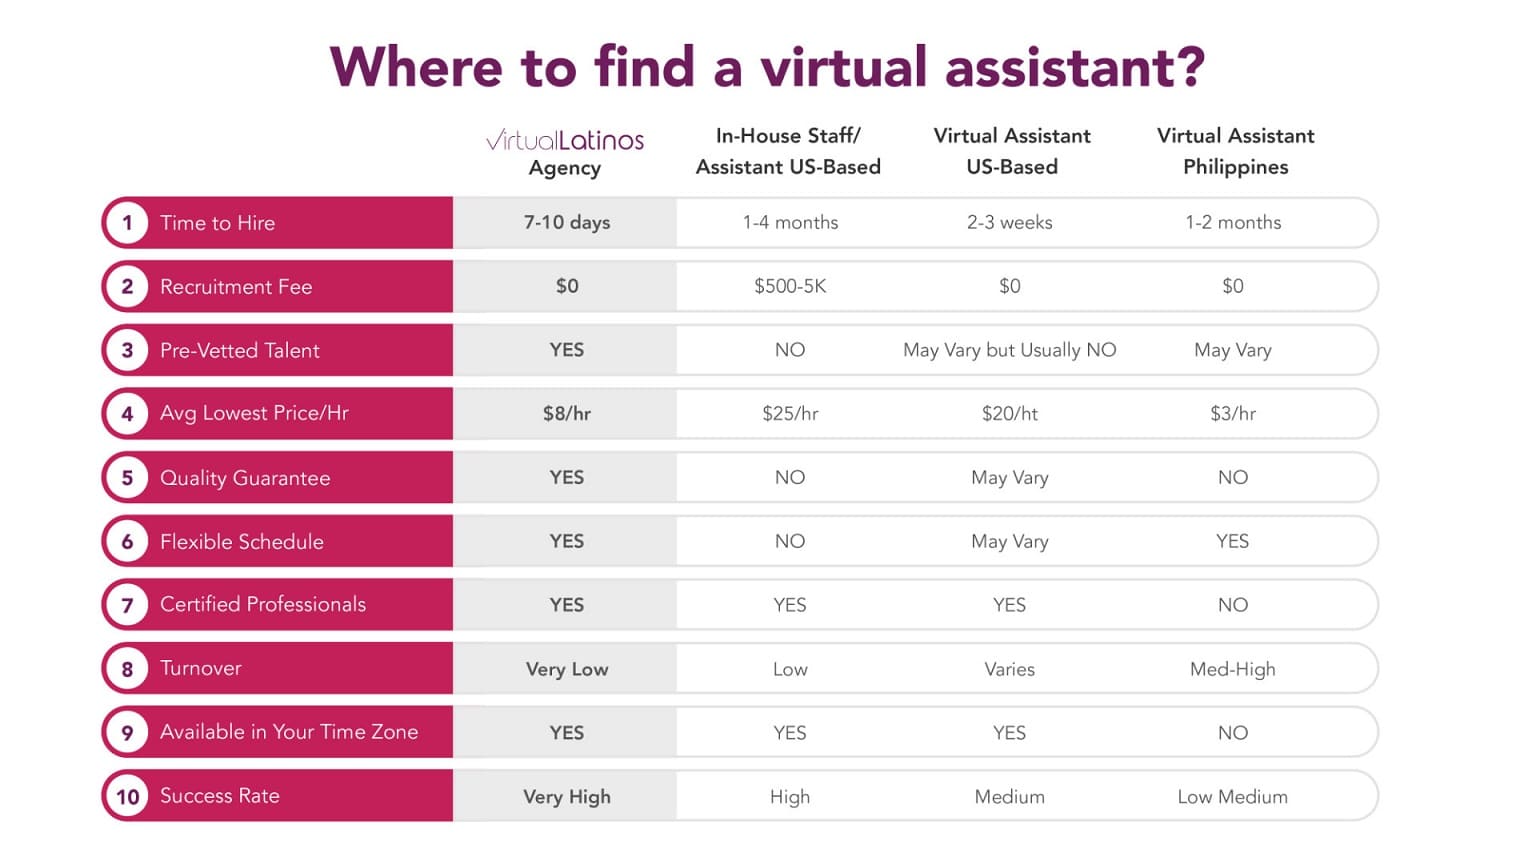 Where to find a virtual assistant?